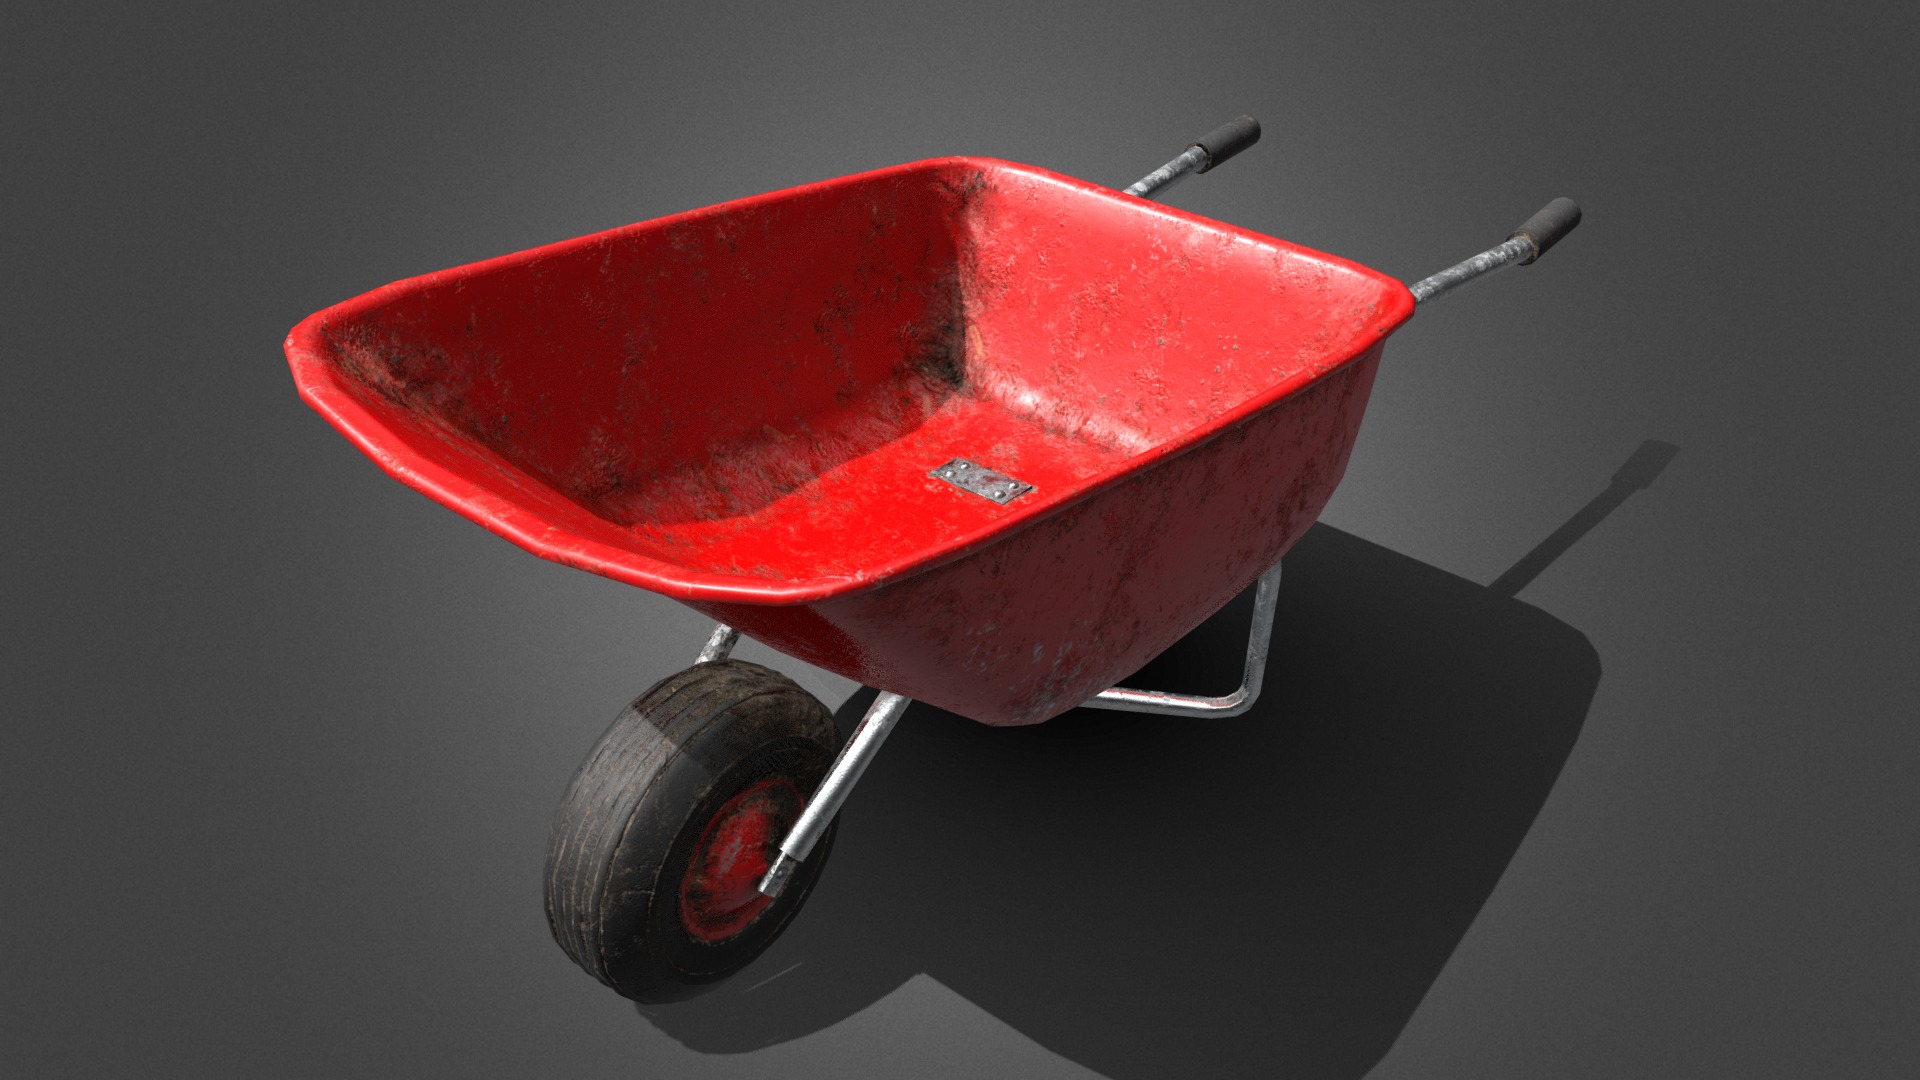 3D model Red Wheelbarrow – Dirty - This is a 3D model of the Red Wheelbarrow - Dirty. The 3D model is about a red and black metal object.